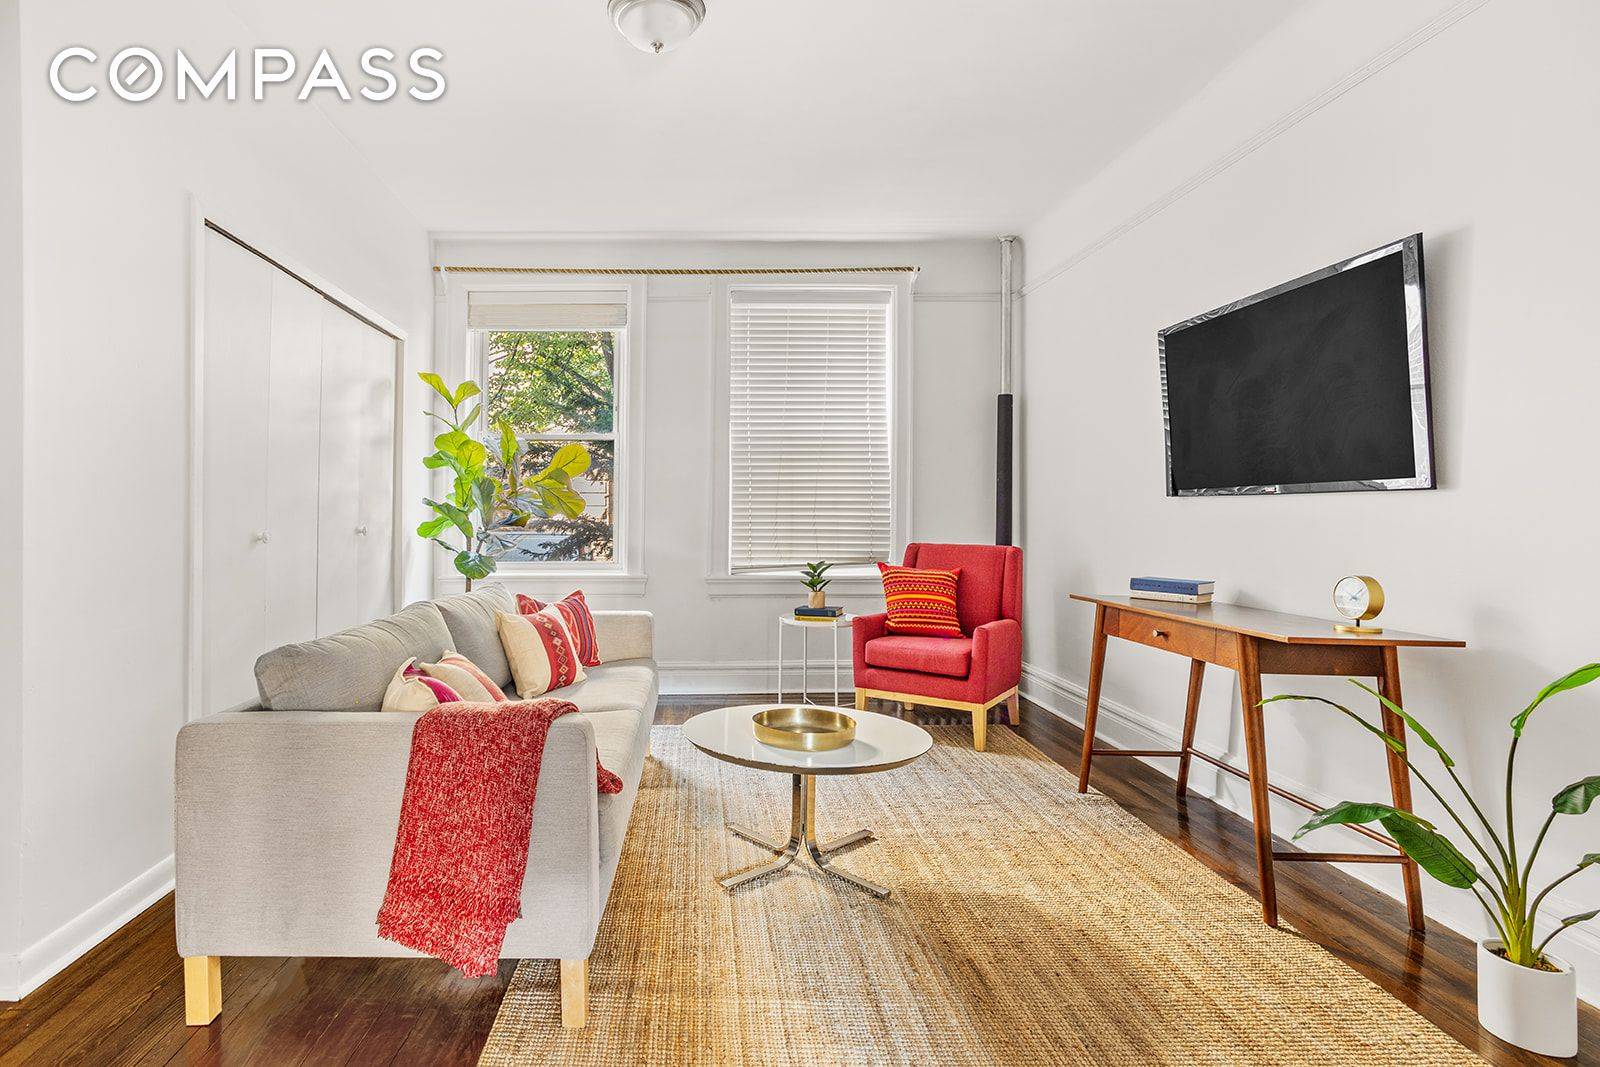 Enjoy beautifully updated, sun splashed interiors in this spacious two bedroom, one bathroom residence at The Colonials, one of Jackson Heights' most beloved historic cooperatives.